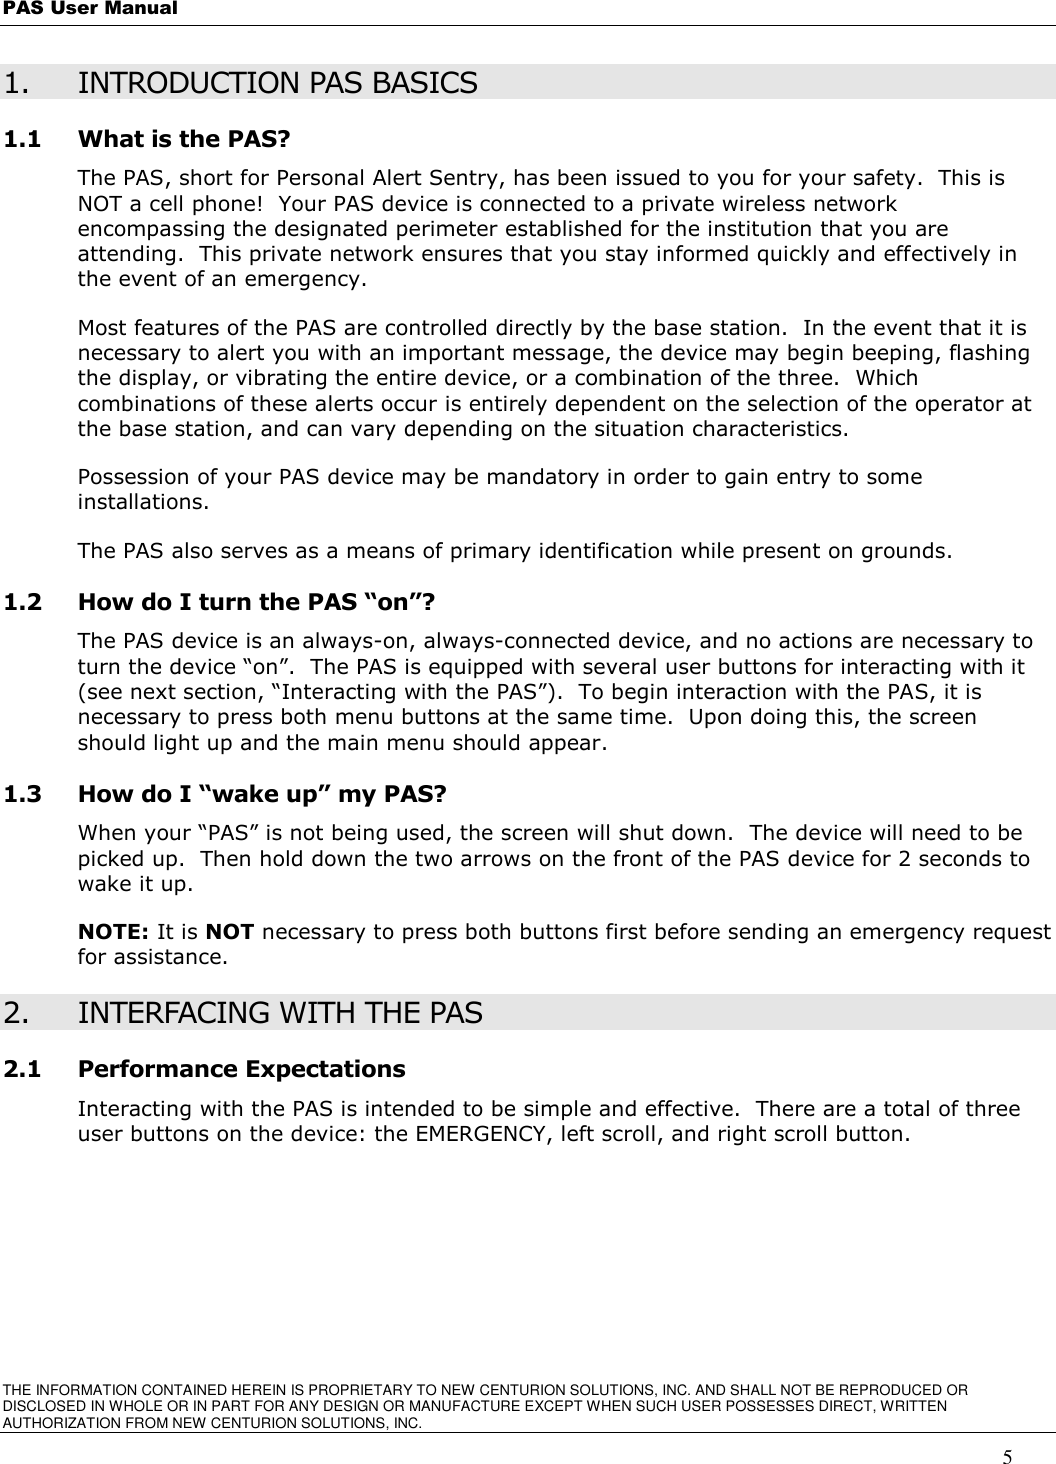 PAS User Manual       THE INFORMATION CONTAINED HEREIN IS PROPRIETARY TO NEW CENTURION SOLUTIONS, INC. AND SHALL NOT BE REPRODUCED OR DISCLOSED IN WHOLE OR IN PART FOR ANY DESIGN OR MANUFACTURE EXCEPT WHEN SUCH USER POSSESSES DIRECT, WRITTEN AUTHORIZATION FROM NEW CENTURION SOLUTIONS, INC.   5 1. INTRODUCTION PAS BASICS 1.1 What is the PAS? The PAS, short for Personal Alert Sentry, has been issued to you for your safety.  This is NOT a cell phone!  Your PAS device is connected to a private wireless network encompassing the designated perimeter established for the institution that you are attending.  This private network ensures that you stay informed quickly and effectively in the event of an emergency.   Most features of the PAS are controlled directly by the base station.  In the event that it is necessary to alert you with an important message, the device may begin beeping, flashing the display, or vibrating the entire device, or a combination of the three.  Which combinations of these alerts occur is entirely dependent on the selection of the operator at the base station, and can vary depending on the situation characteristics.   Possession of your PAS device may be mandatory in order to gain entry to some installations.   The PAS also serves as a means of primary identification while present on grounds.   1.2 How do I turn the PAS “on”? The PAS device is an always-on, always-connected device, and no actions are necessary to turn the device “on”.  The PAS is equipped with several user buttons for interacting with it (see next section, “Interacting with the PAS”).  To begin interaction with the PAS, it is necessary to press both menu buttons at the same time.  Upon doing this, the screen should light up and the main menu should appear. 1.3 How do I “wake up” my PAS?   When your “PAS” is not being used, the screen will shut down.  The device will need to be picked up.  Then hold down the two arrows on the front of the PAS device for 2 seconds to wake it up. NOTE: It is NOT necessary to press both buttons first before sending an emergency request for assistance.   2. INTERFACING WITH THE PAS 2.1 Performance Expectations Interacting with the PAS is intended to be simple and effective.  There are a total of three user buttons on the device: the EMERGENCY, left scroll, and right scroll button.     